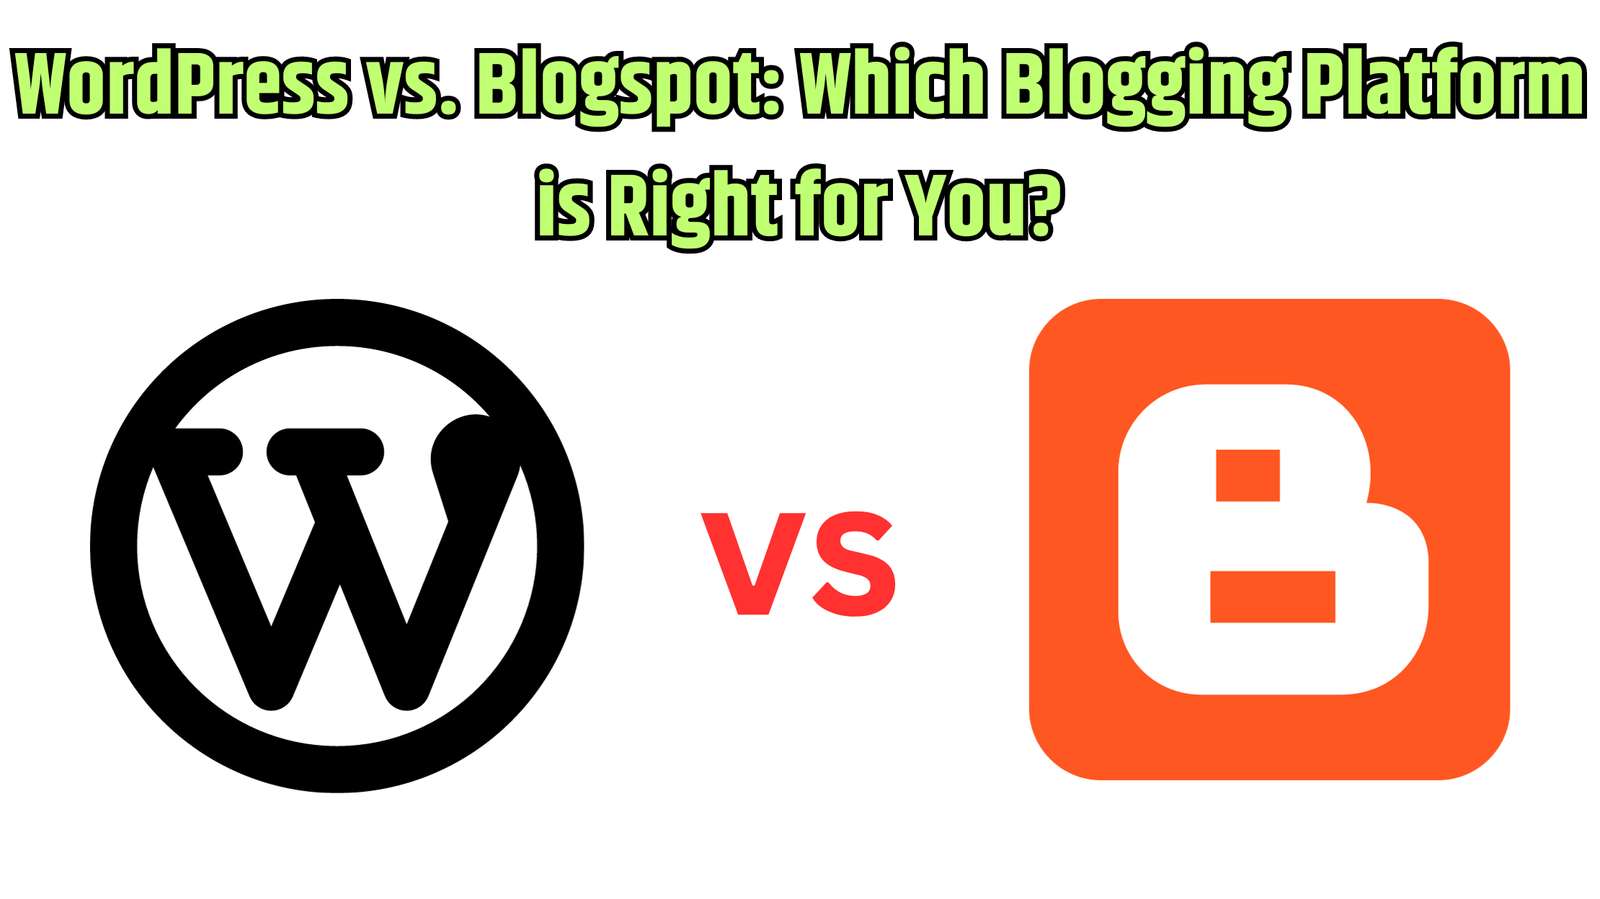 WordPress vs. Blogspot Which Blogging Platform is Right for You